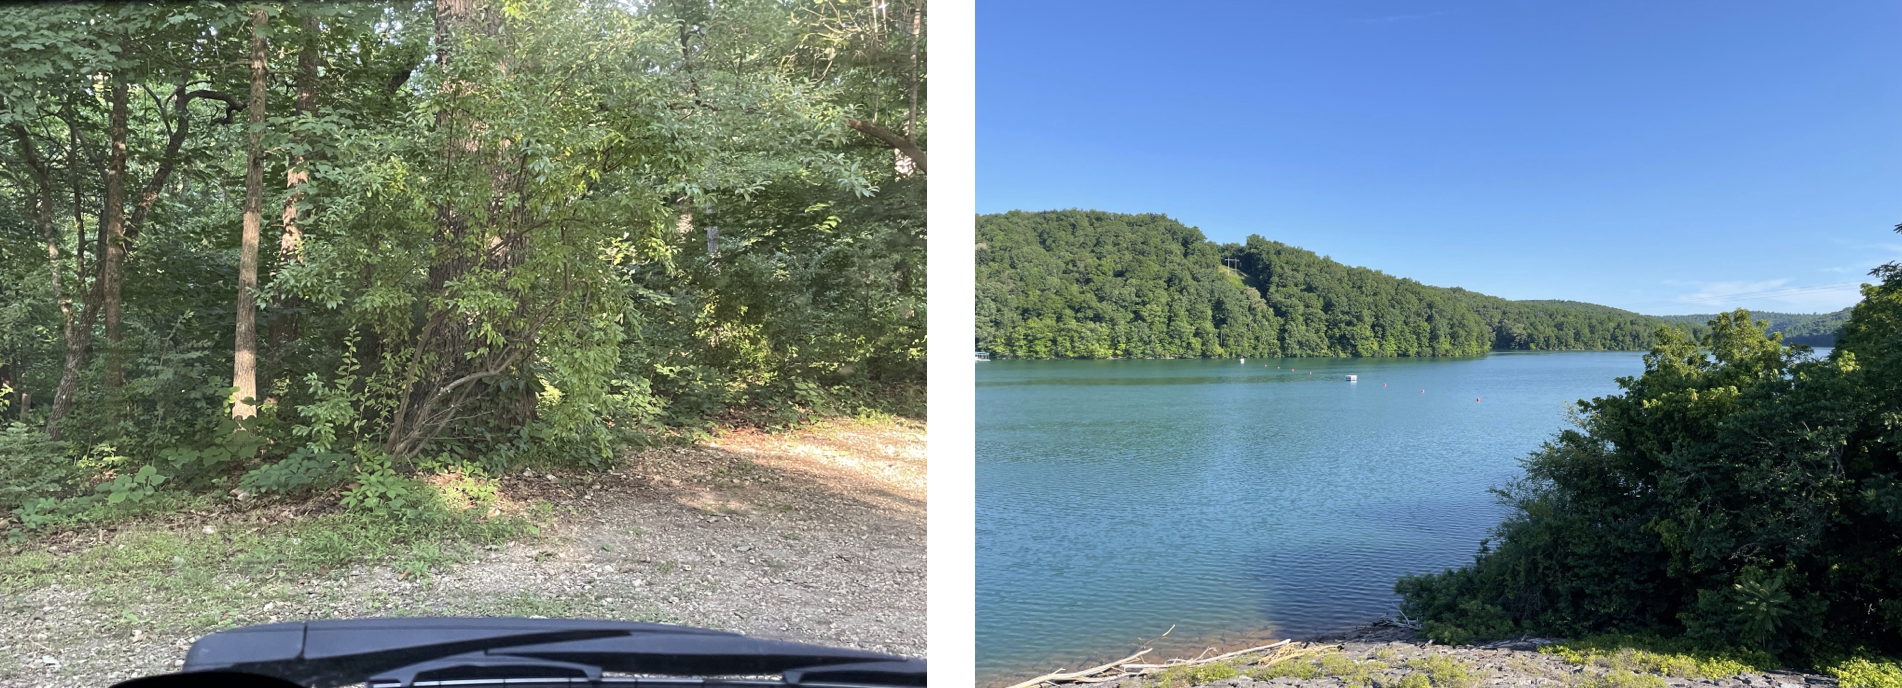 The start of this adventure at the campground at Norris Dam State Park.  Photos taken by and the property of FourWalls.